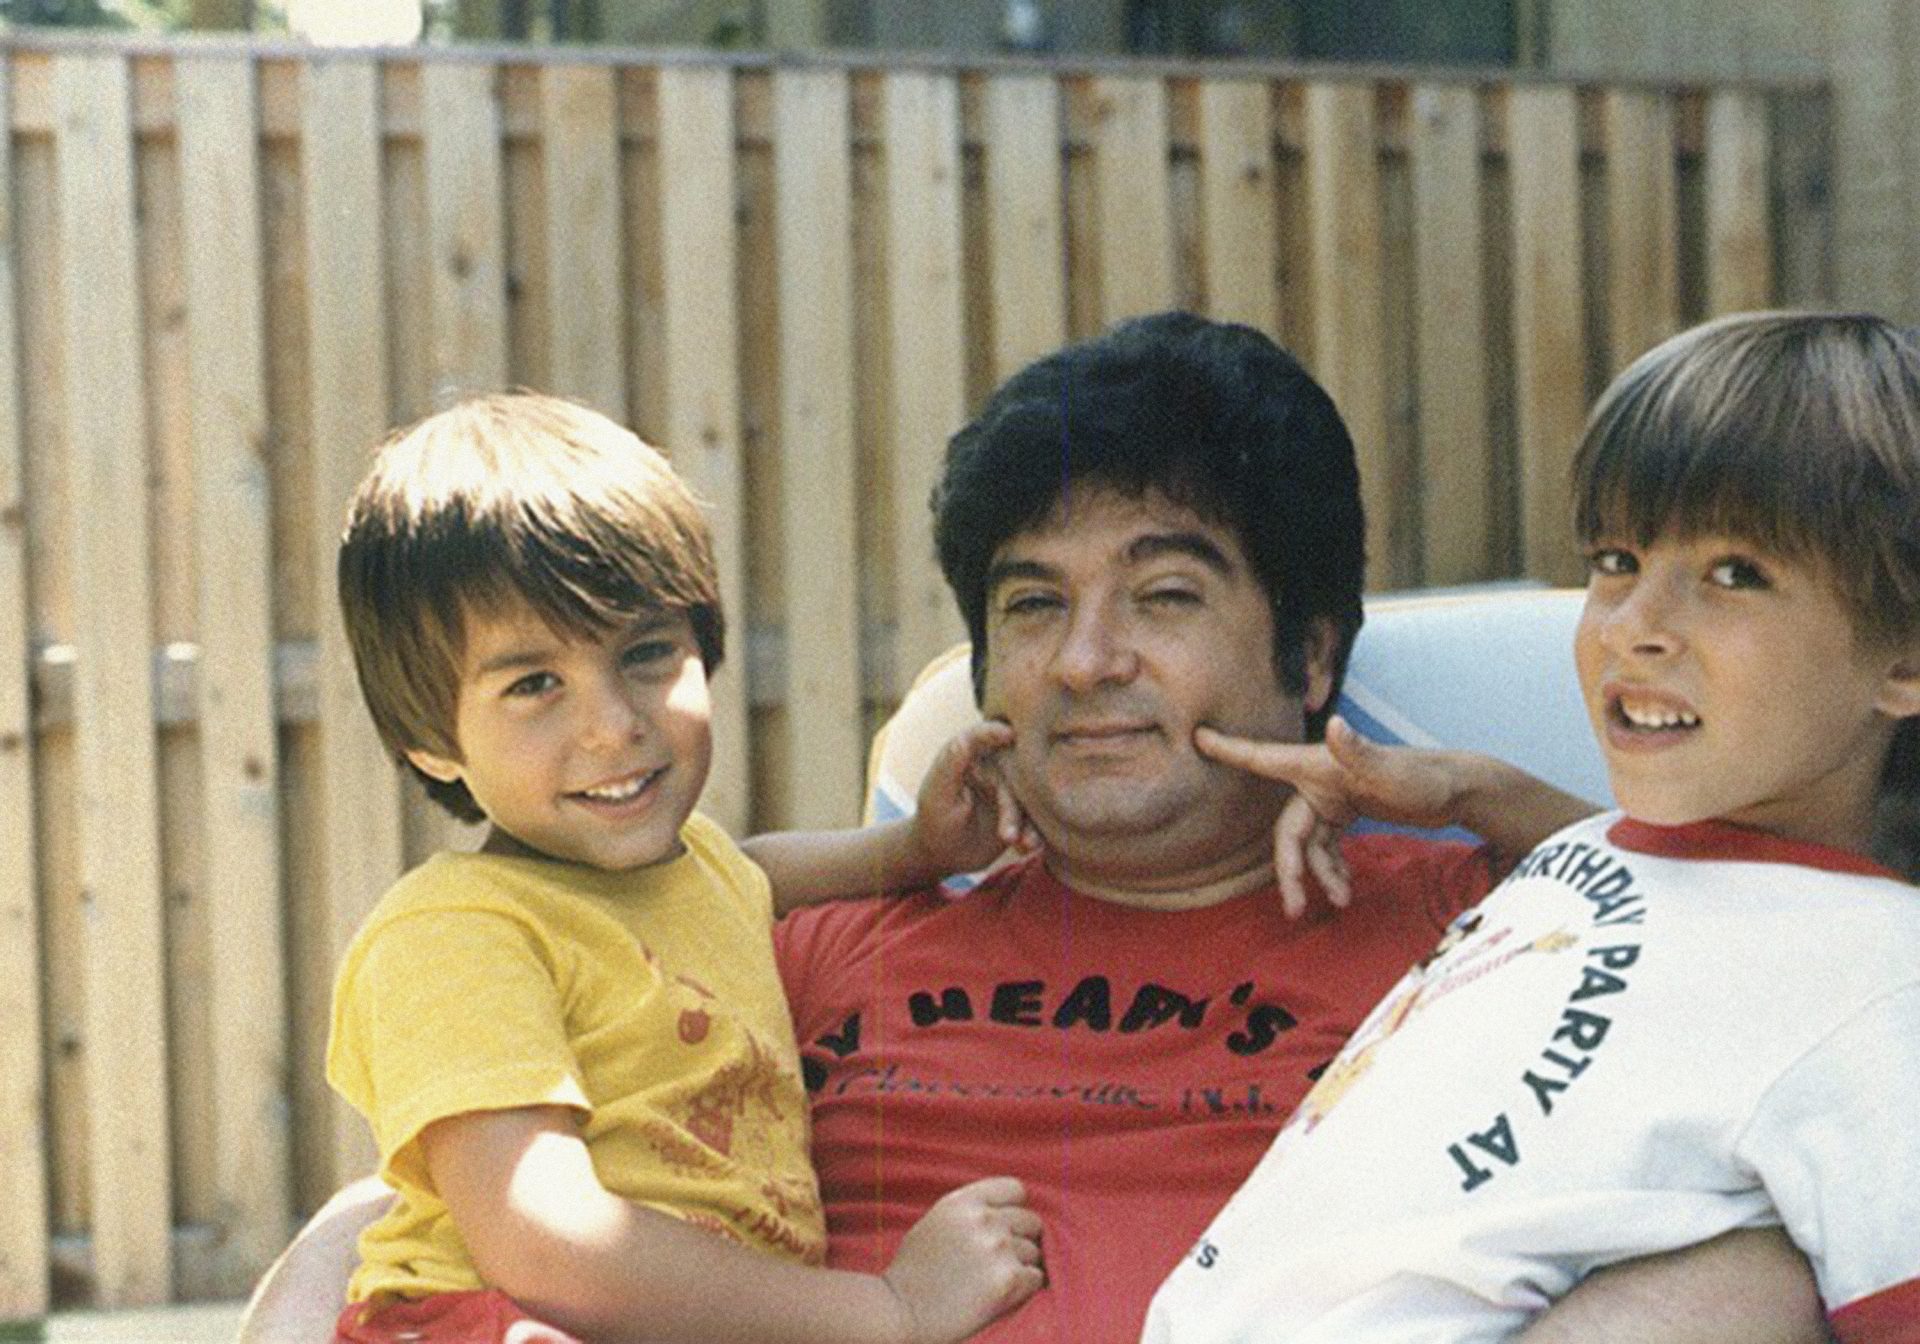 This circa 1987 photo provided by the family shows Isaiah Kuperstein with his sons, Daniel, left, and Adam in the Queens borough of New York. Isaiah Kuperstein died from COVID-19 on April 4, 2020. He was 70.